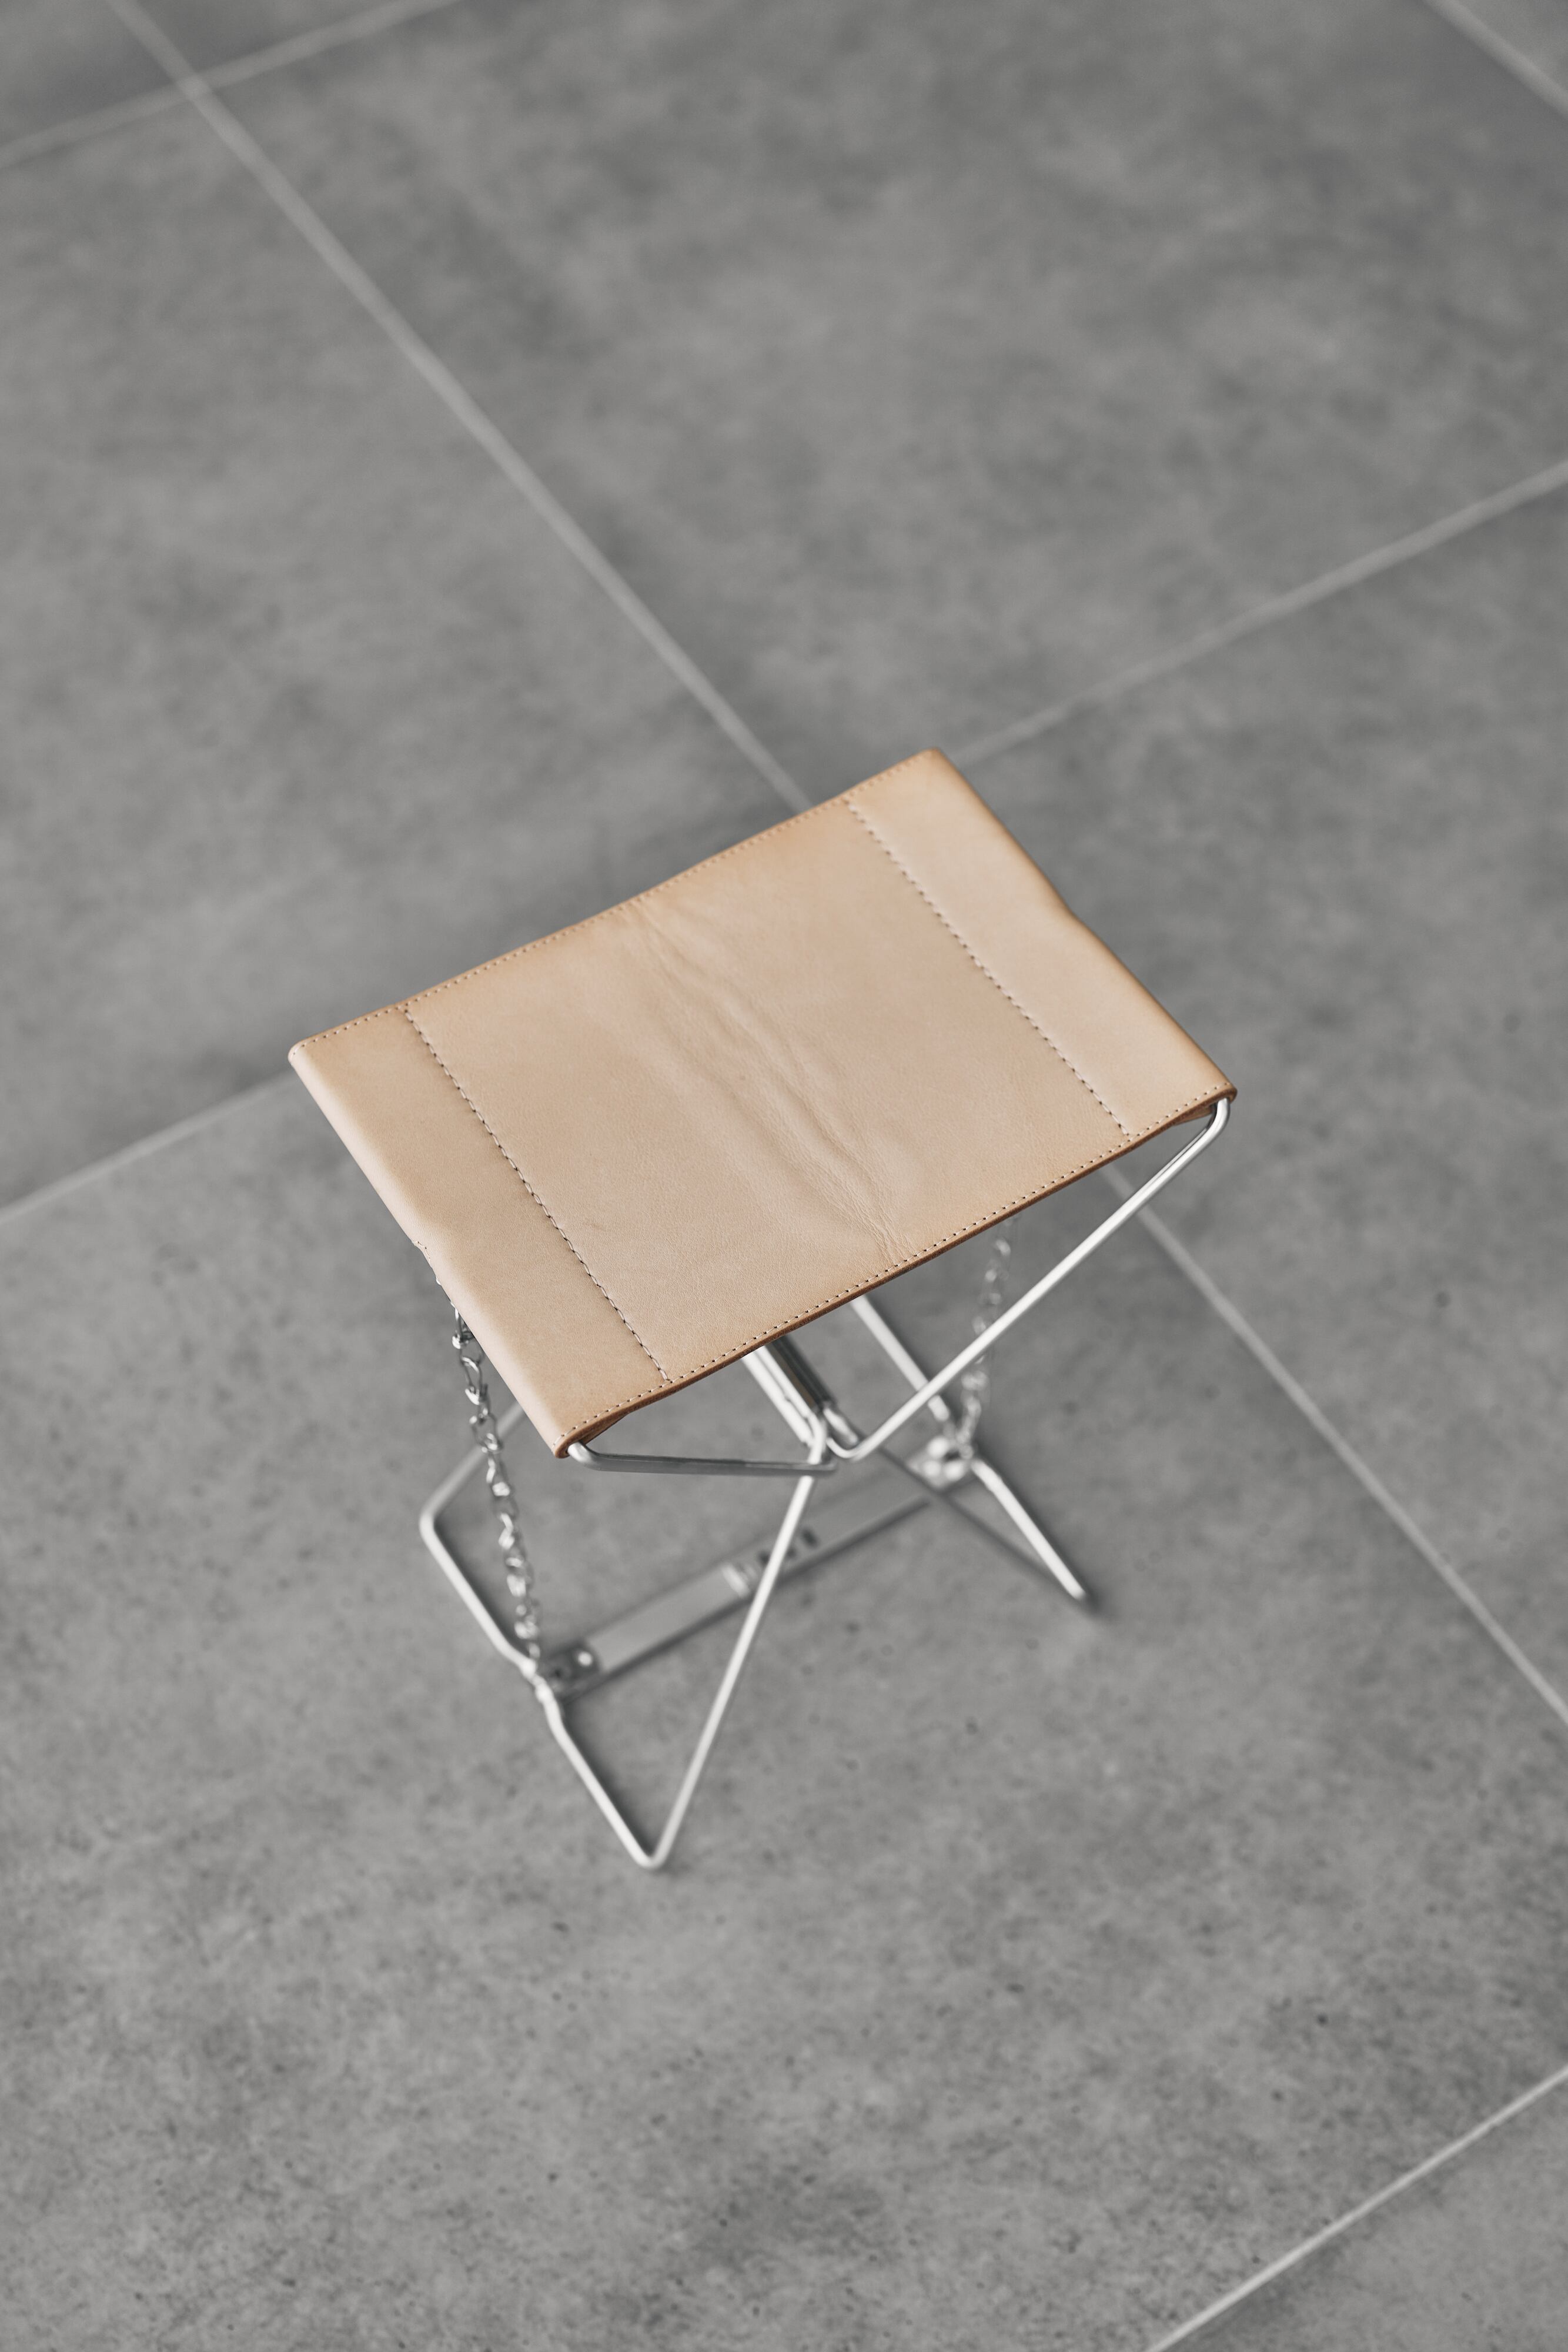 Wanderout / Universal Stool Nume | wanderout lottery product